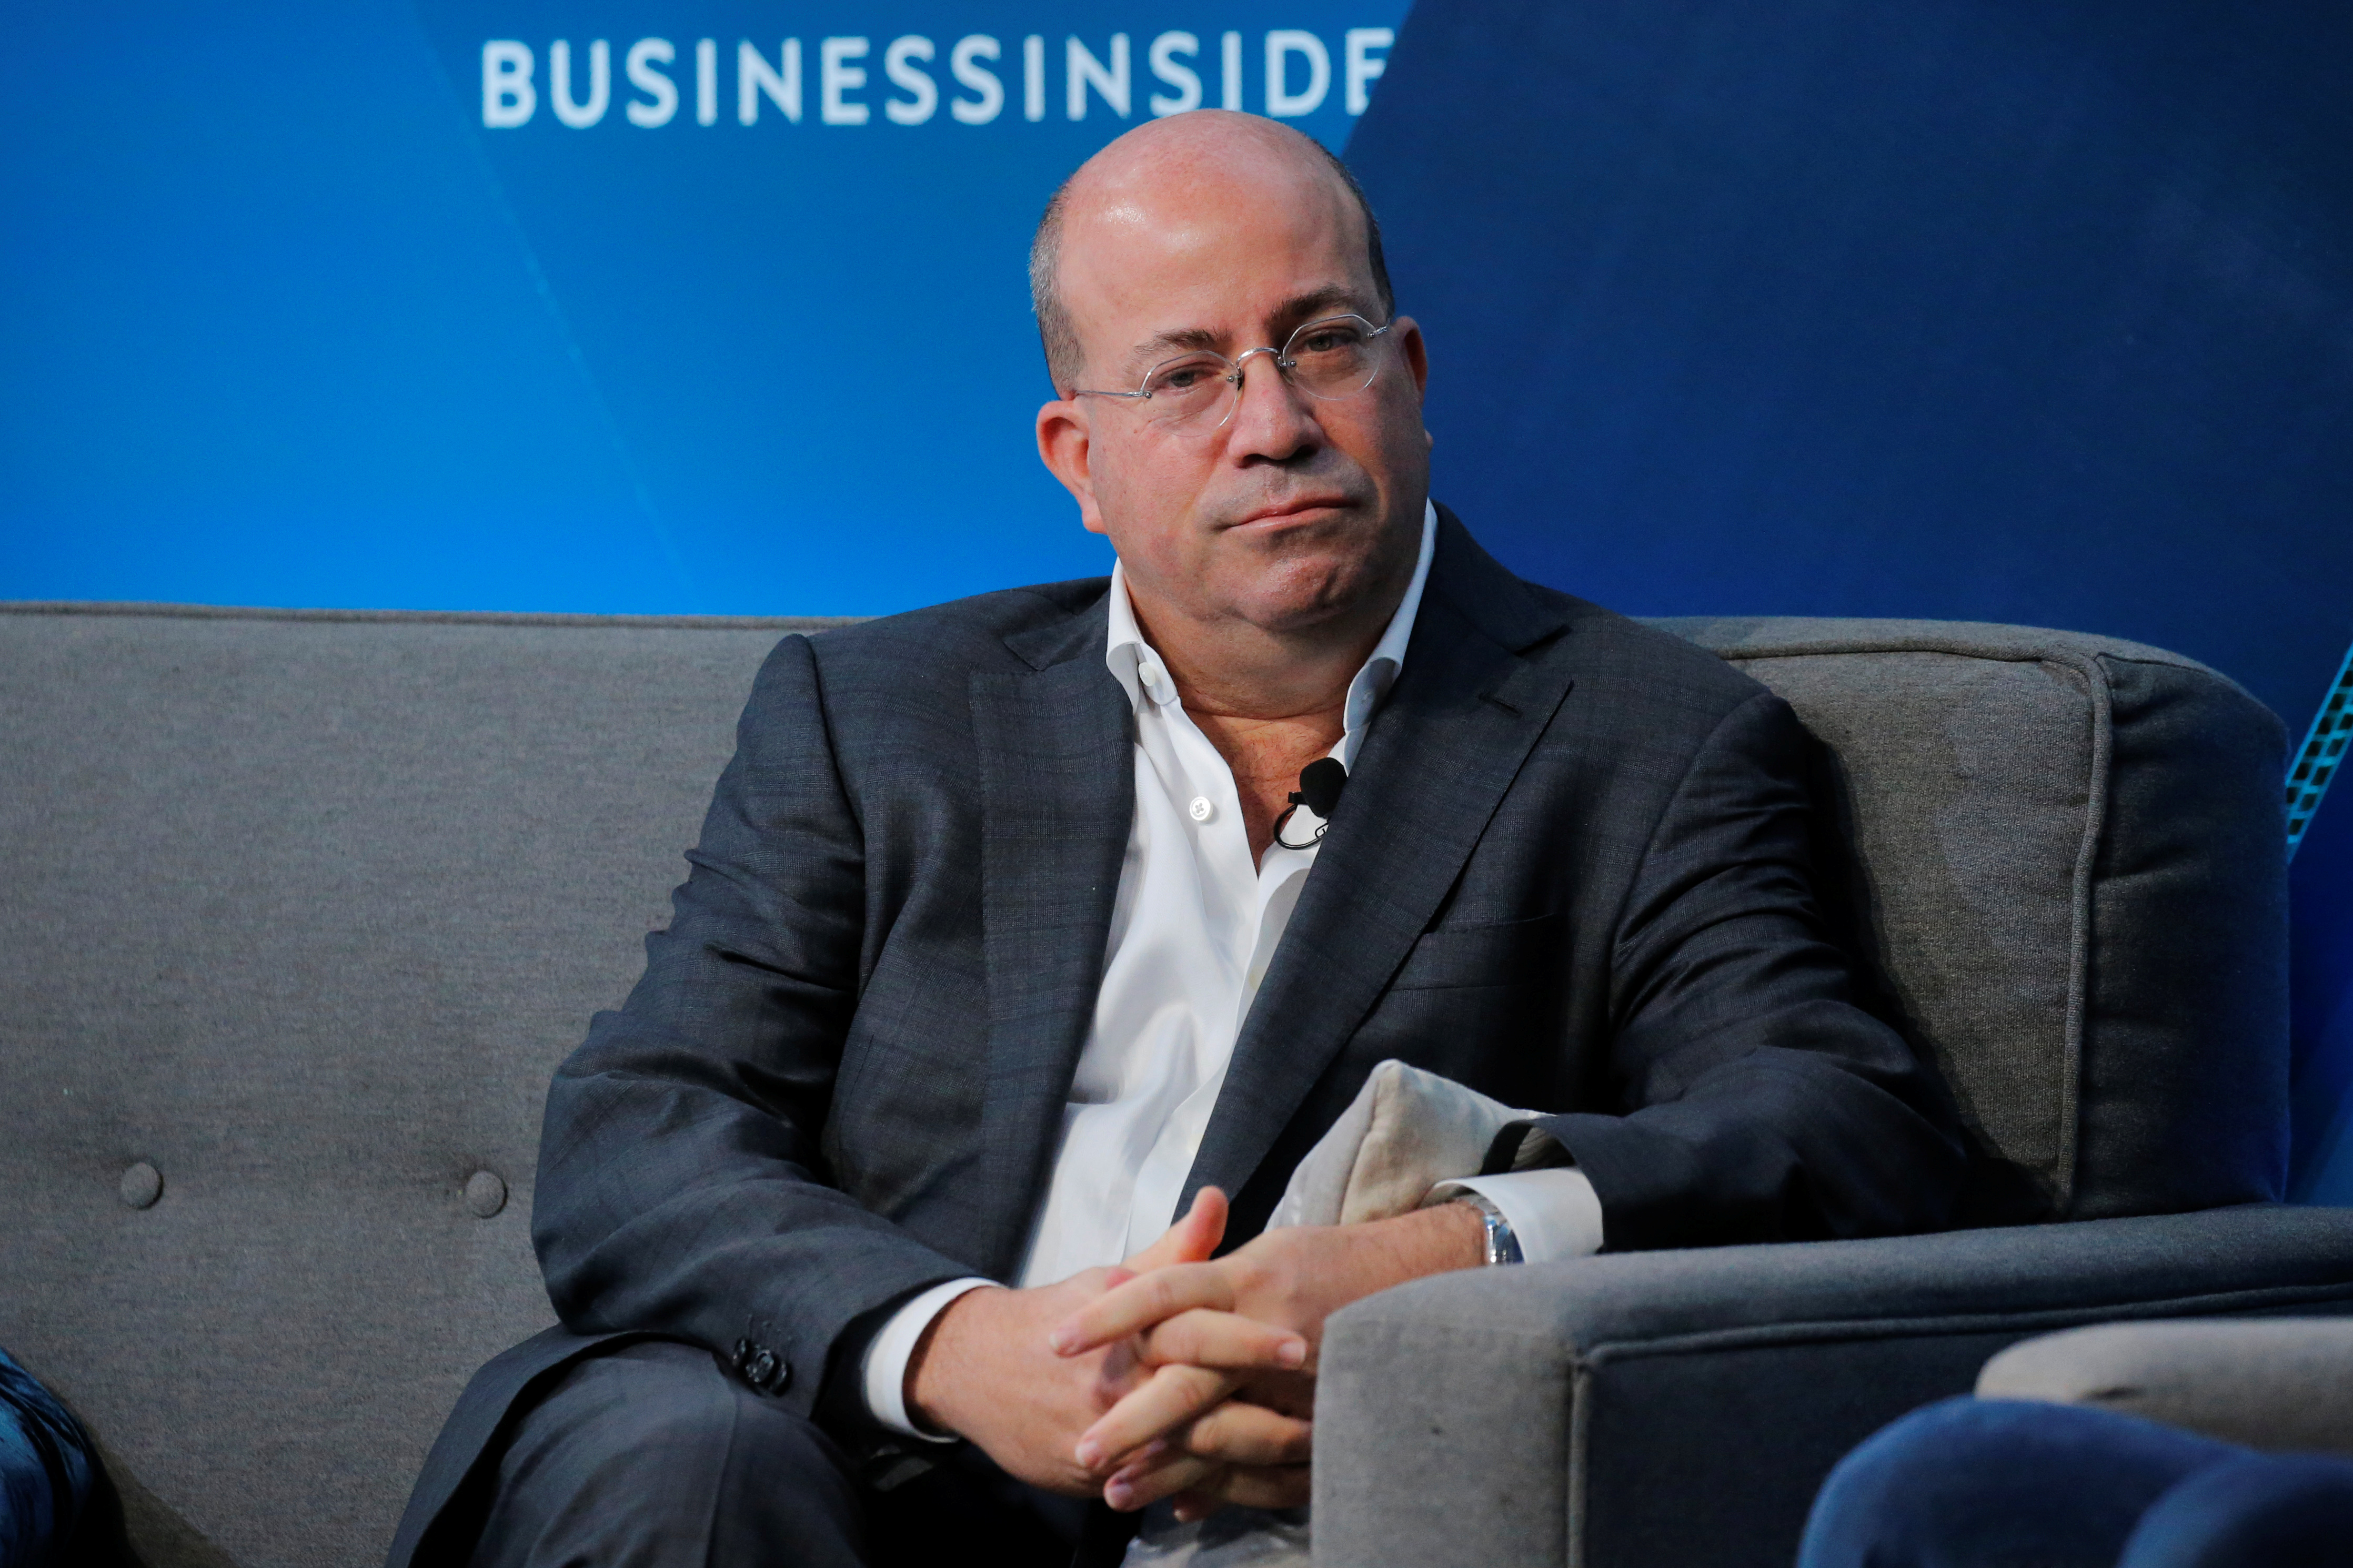 CNN President Jeff Zucker speaks at the 2017 Business Insider Ignition: Future of Media conference in New York, U.S., November 30, 2017. REUTERS/Lucas Jackson